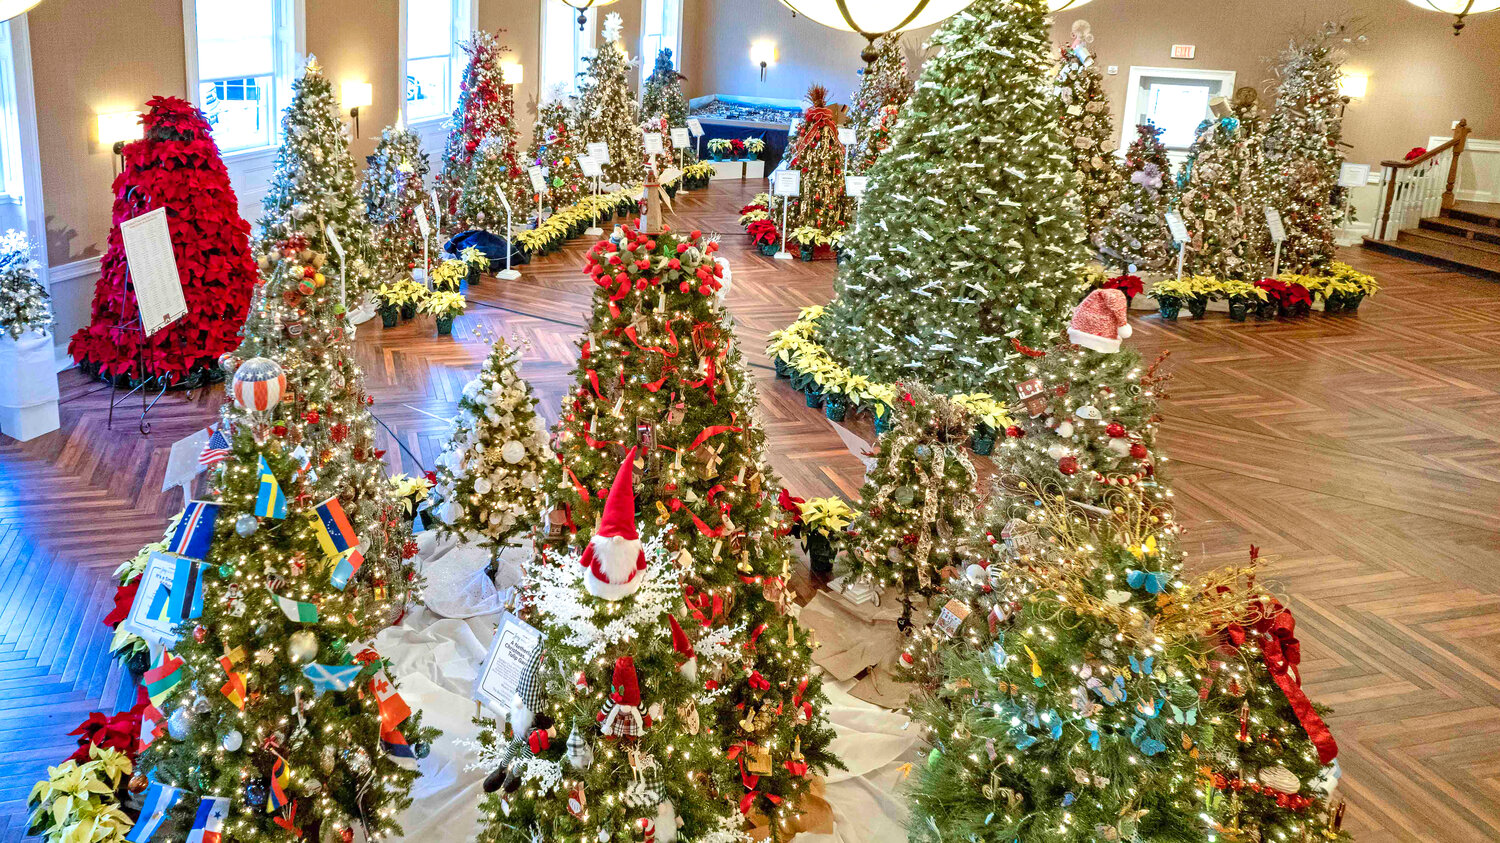 The The Tidewater Inn's Gold Ballroom is seen decorated for the Festival of Trees.